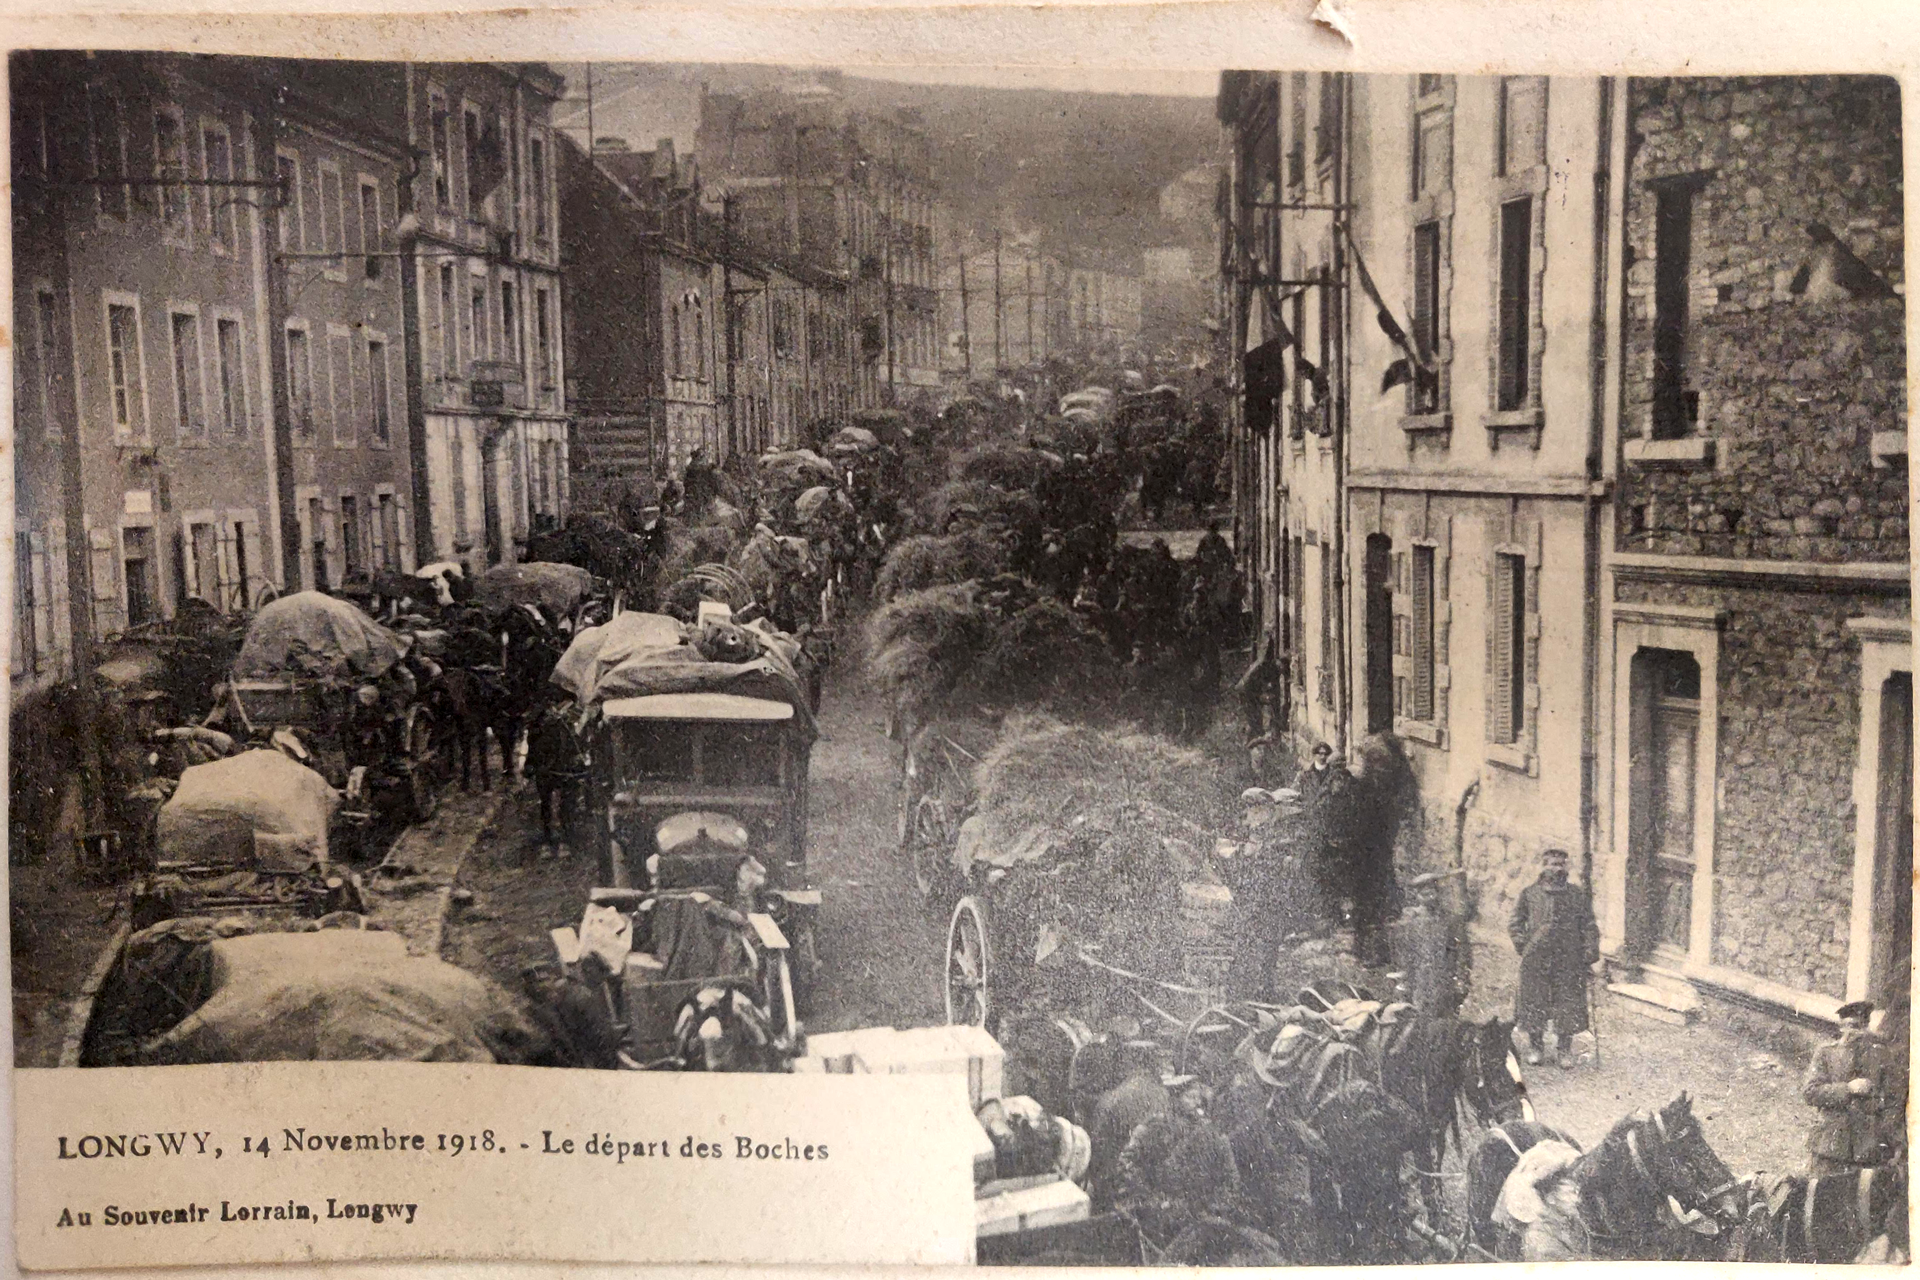 A supply caravan in Europe days after the Armistice